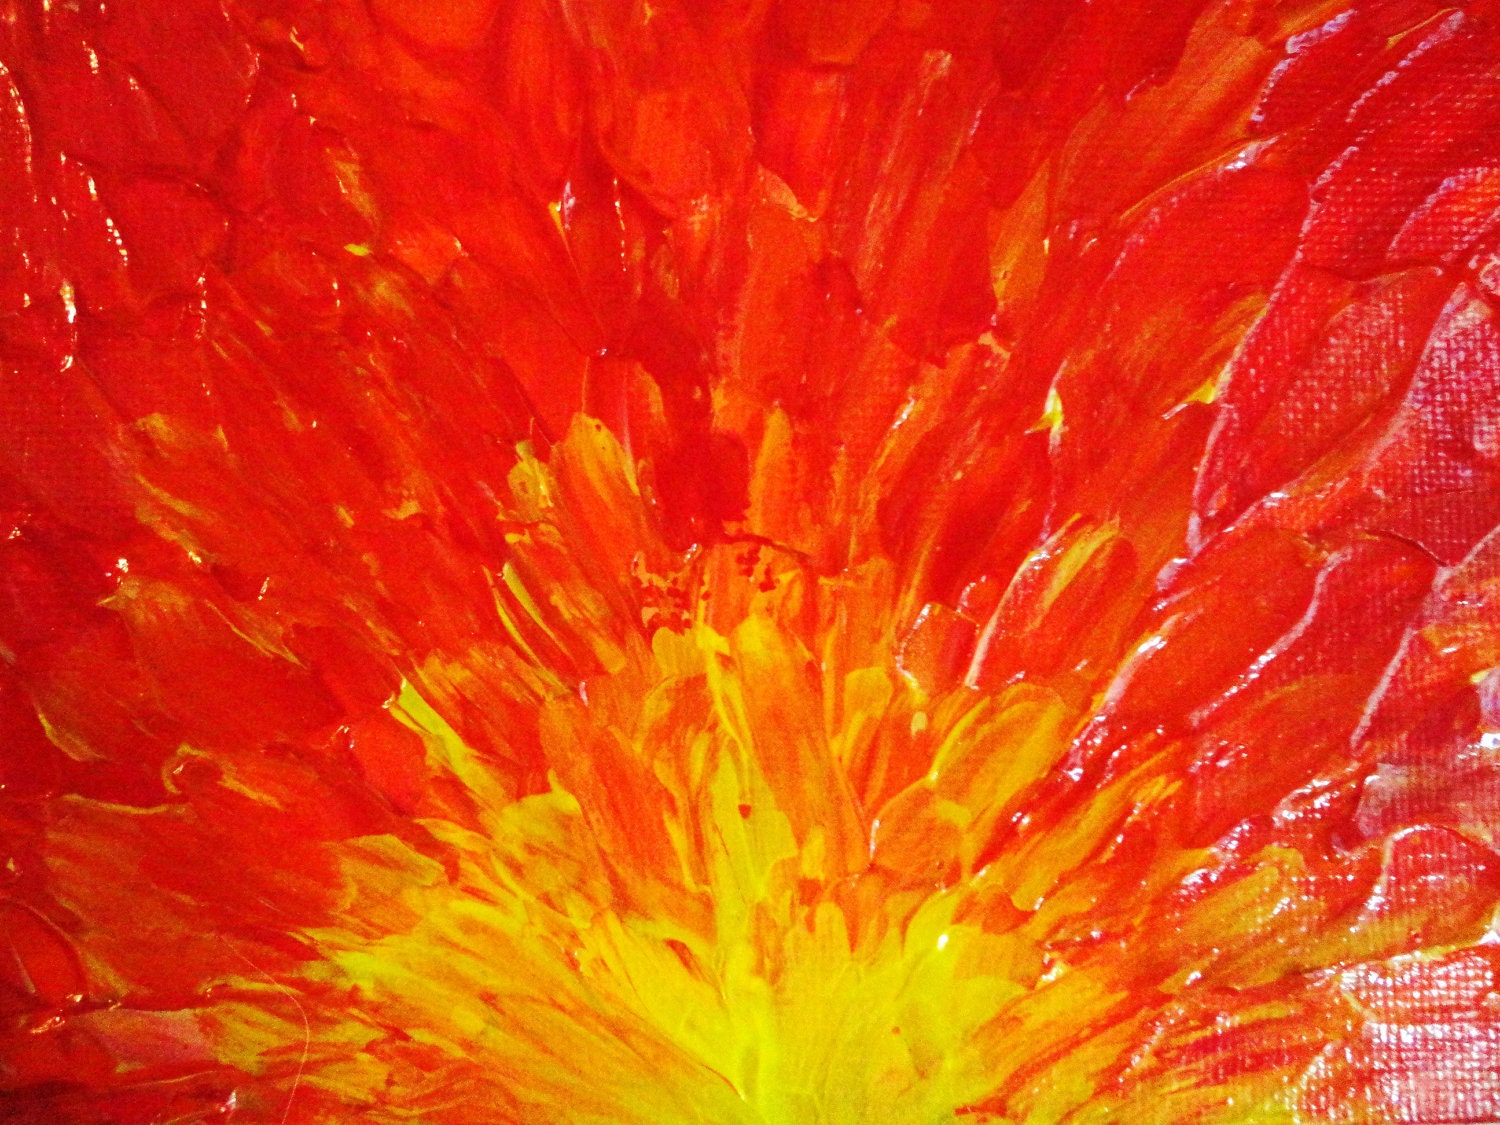 SALE - Original Abstract Painting 5 x 7 Acrylic Fury, Fiery Flames Red Orange Yellow Bright Bold Disaster Volcanic Eruption Explosion Art - EbiEmporium